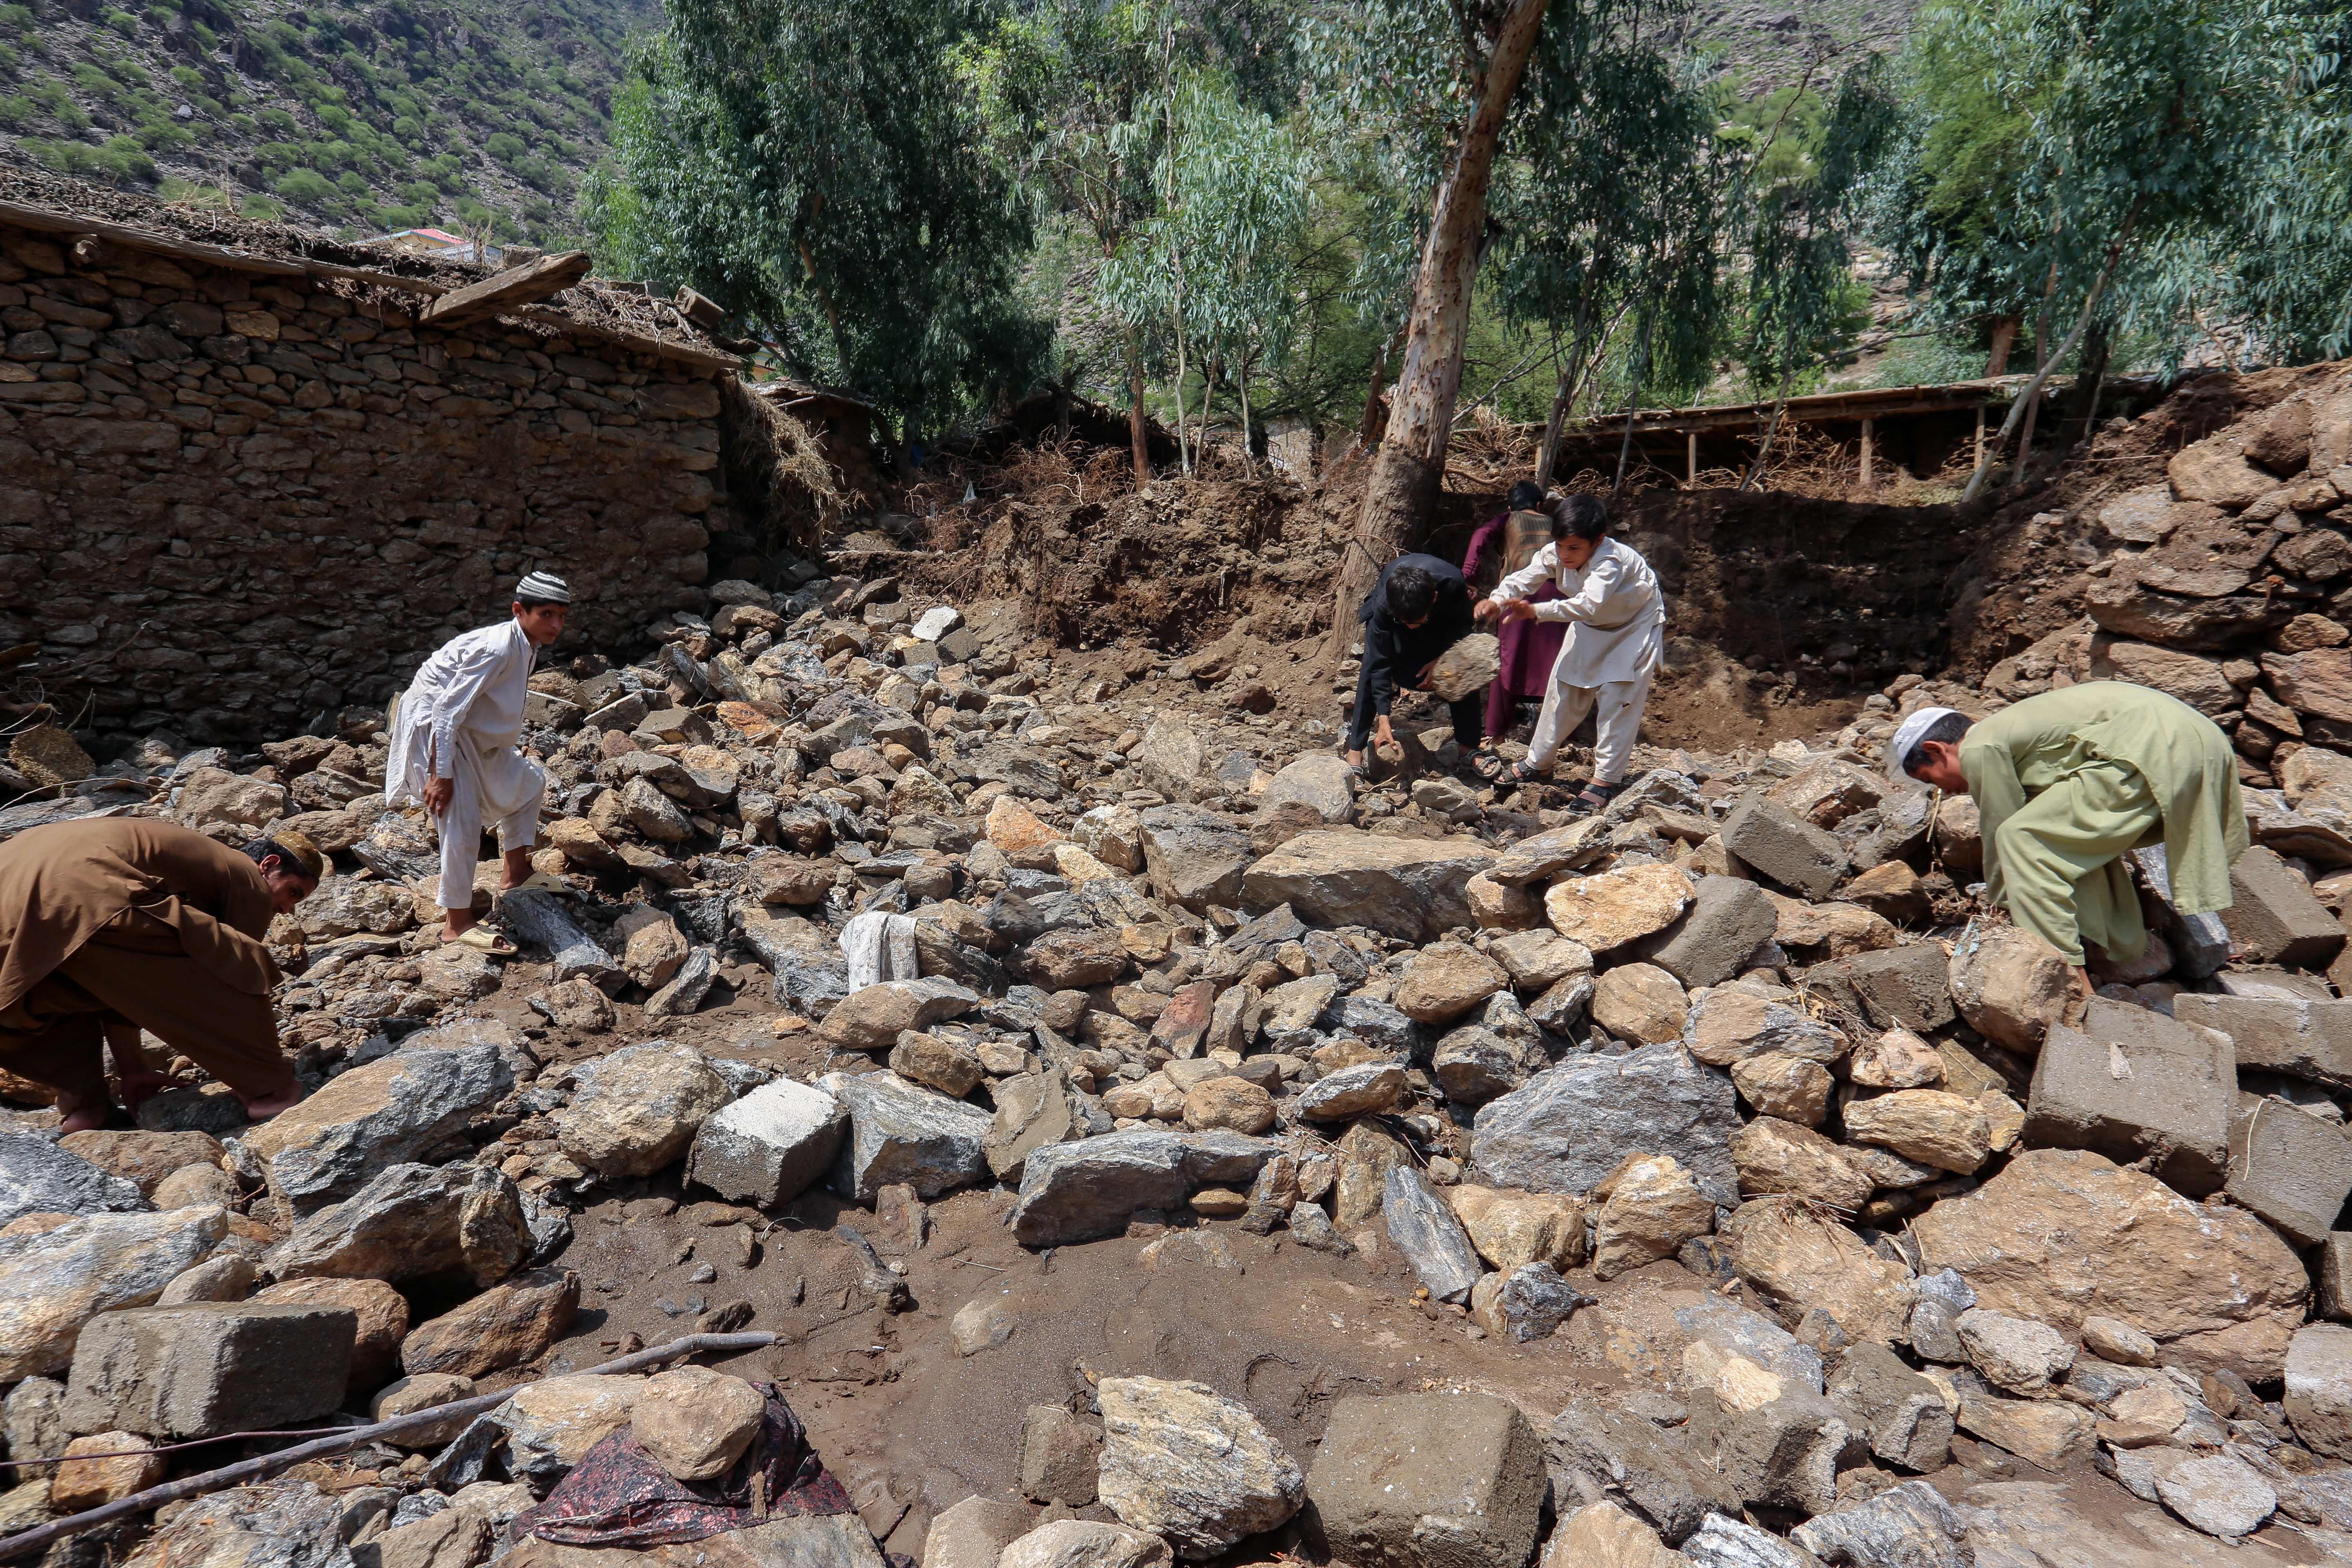 Afghan villagers clean debris next to their houses damaged in flash floods in Watapur district of Kunar province